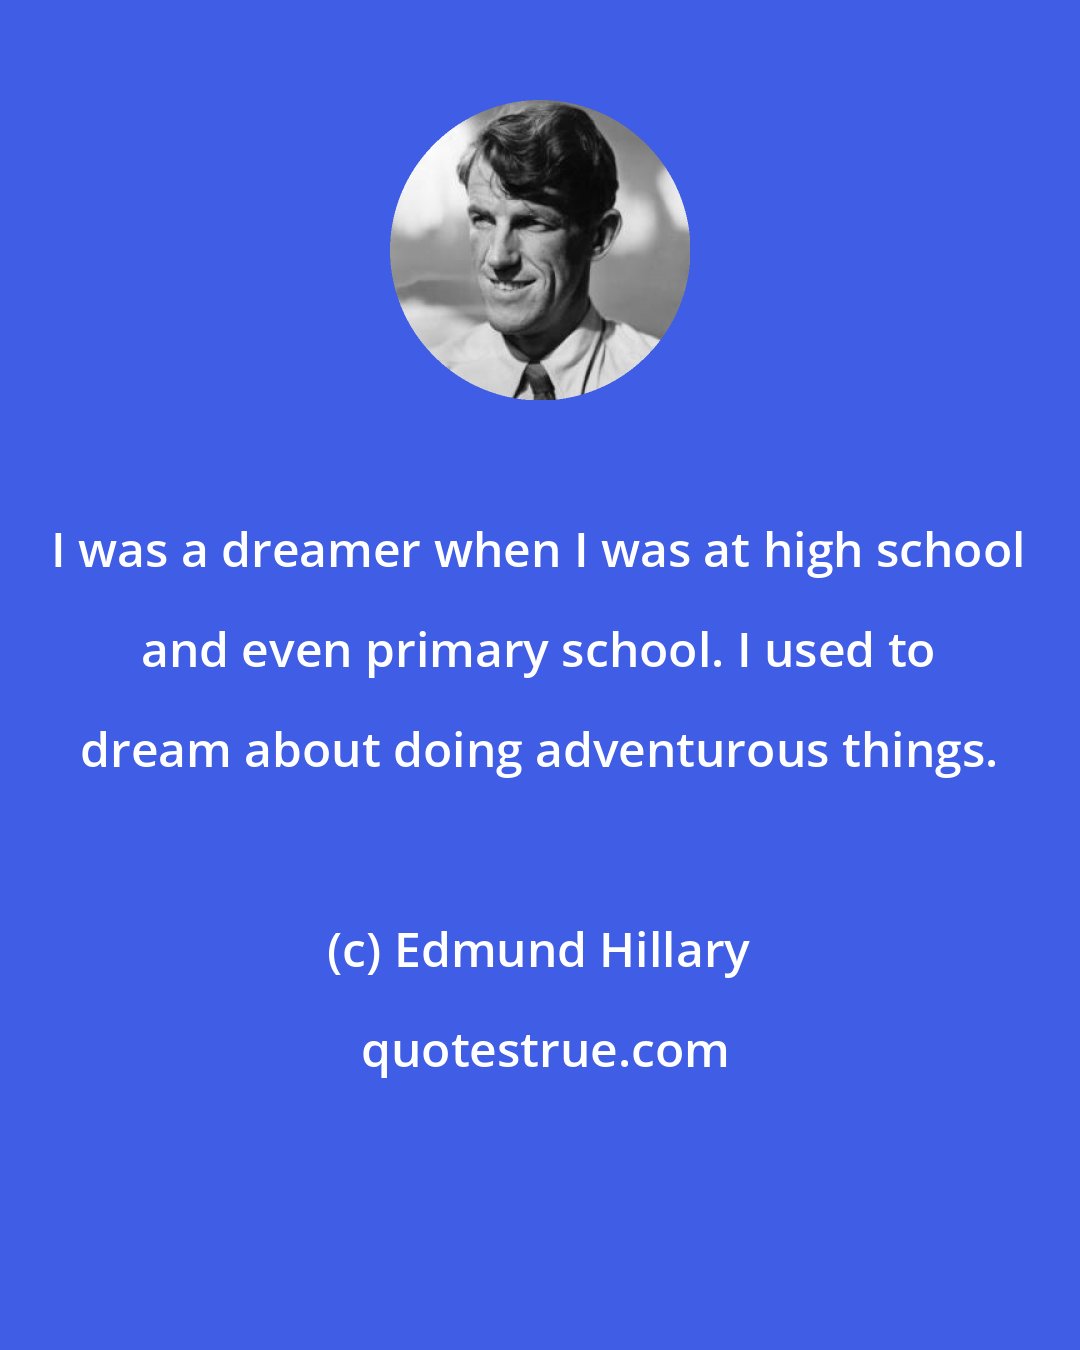 Edmund Hillary: I was a dreamer when I was at high school and even primary school. I used to dream about doing adventurous things.